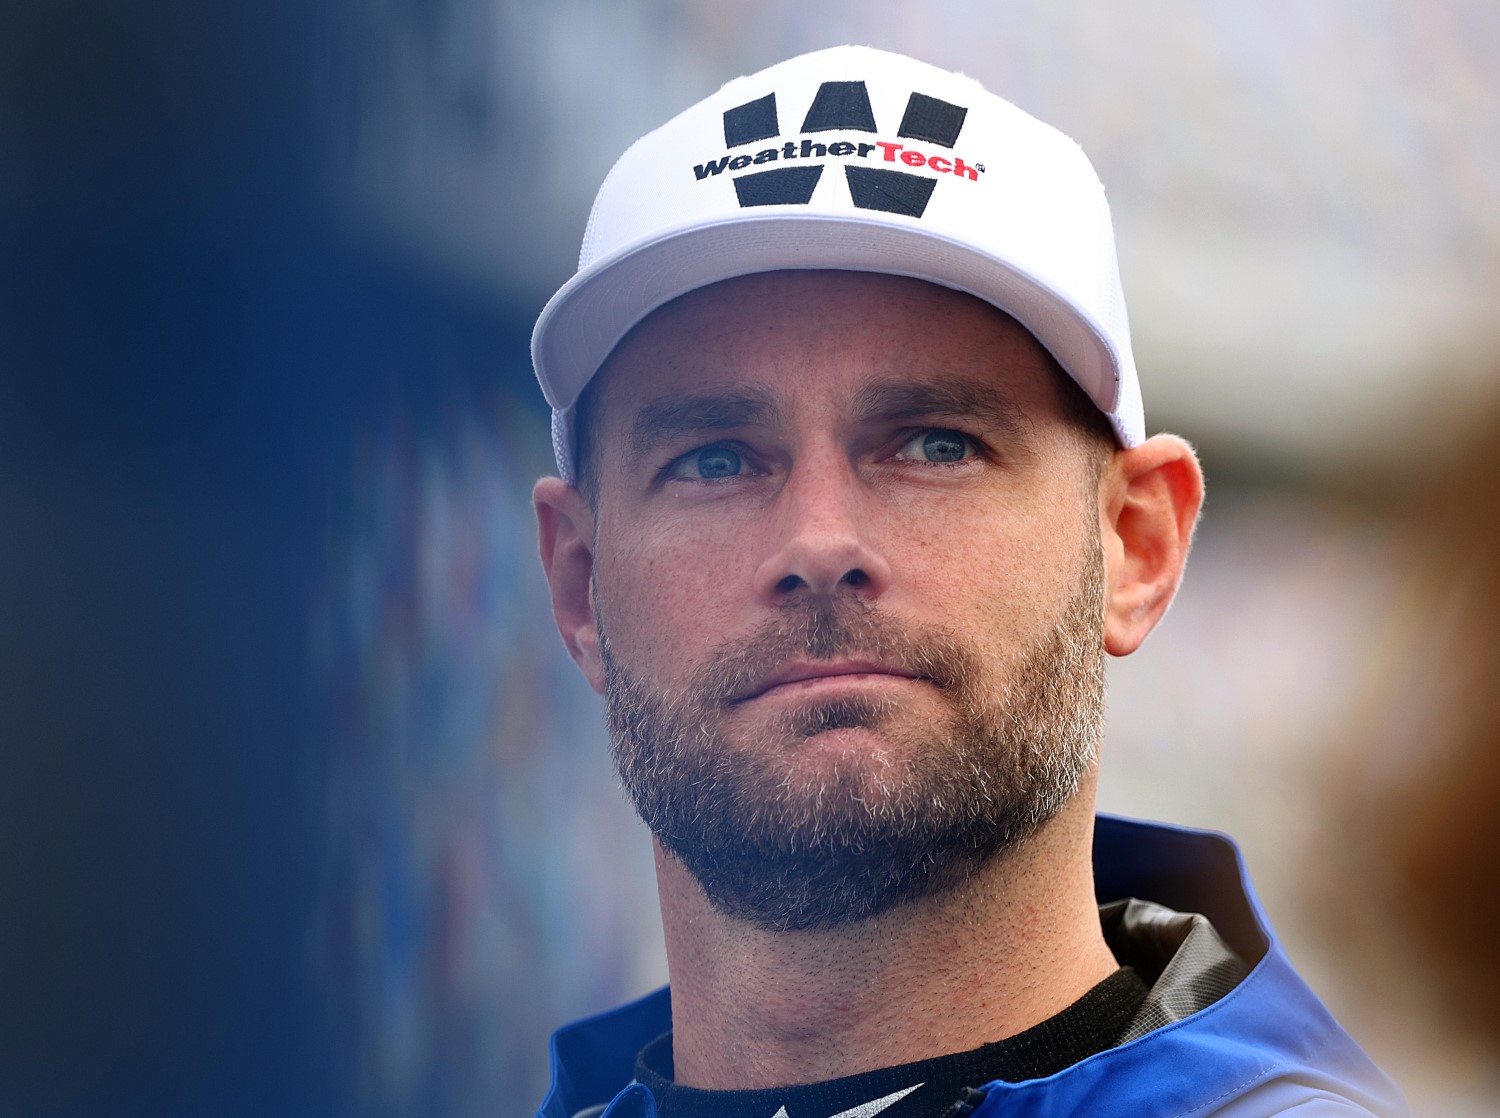 Shane Van Gisbergen, driver of the #97 WeatherTech Chevrolet, looks on during qualifying for the NASCAR Xfinity Series United Rentals 300 at Daytona International Speedway on February 17, 2024 in Daytona Beach, Florida. (Photo by Jared C. Tilton/Getty Images)